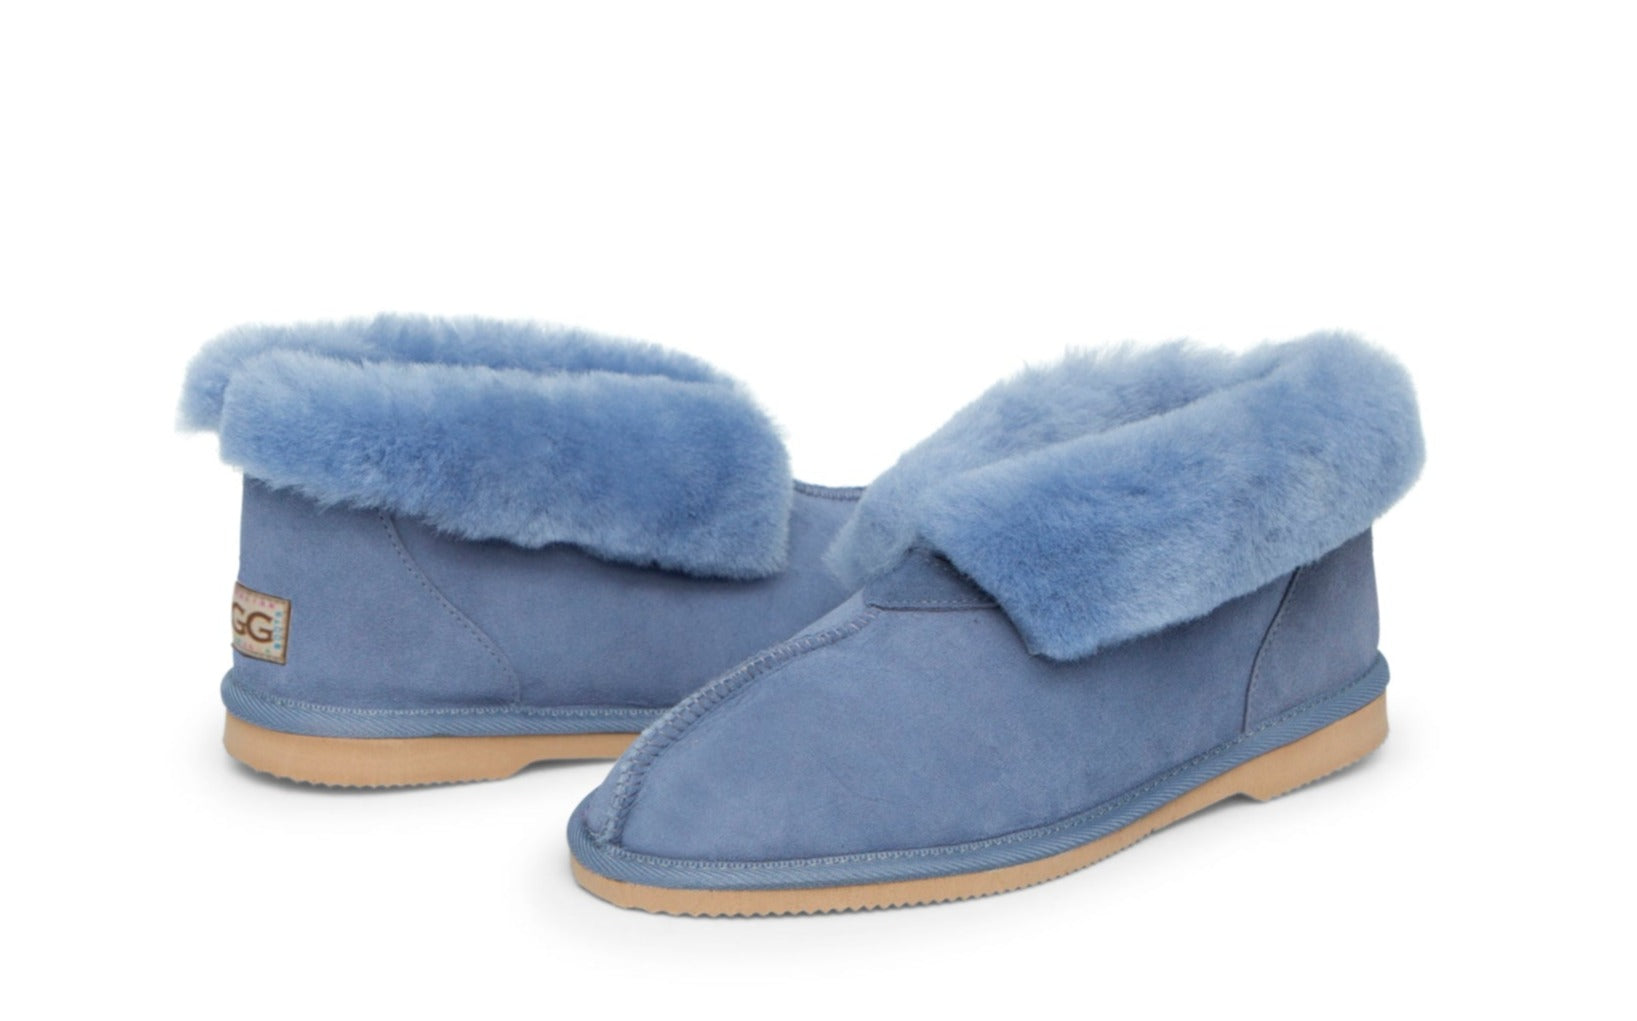 Kid's Ugg Slippers, with sheepskin rolled out at the top in denim blue